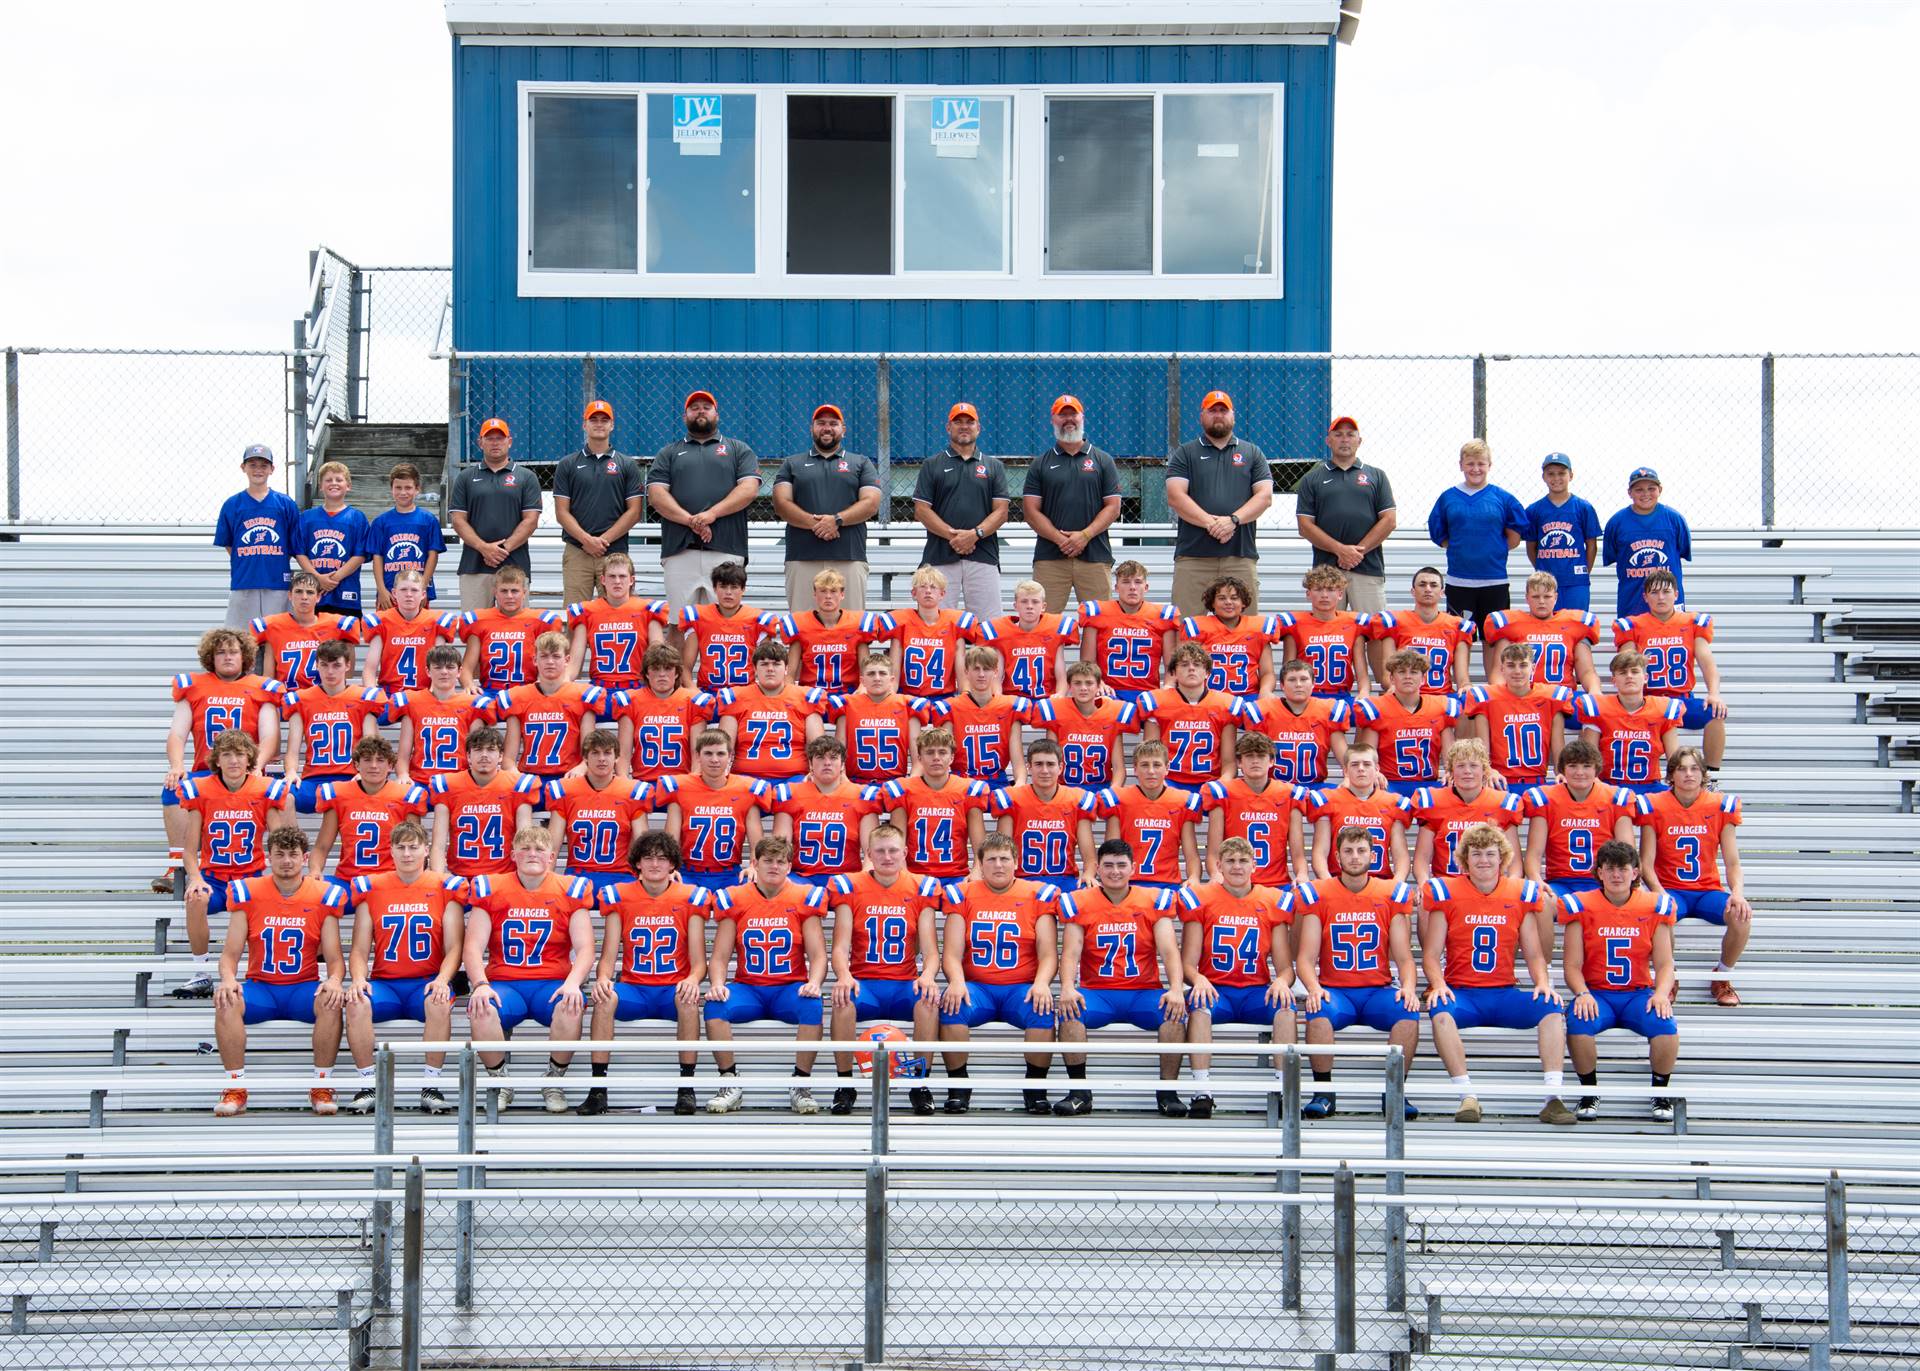 Charger Football Team